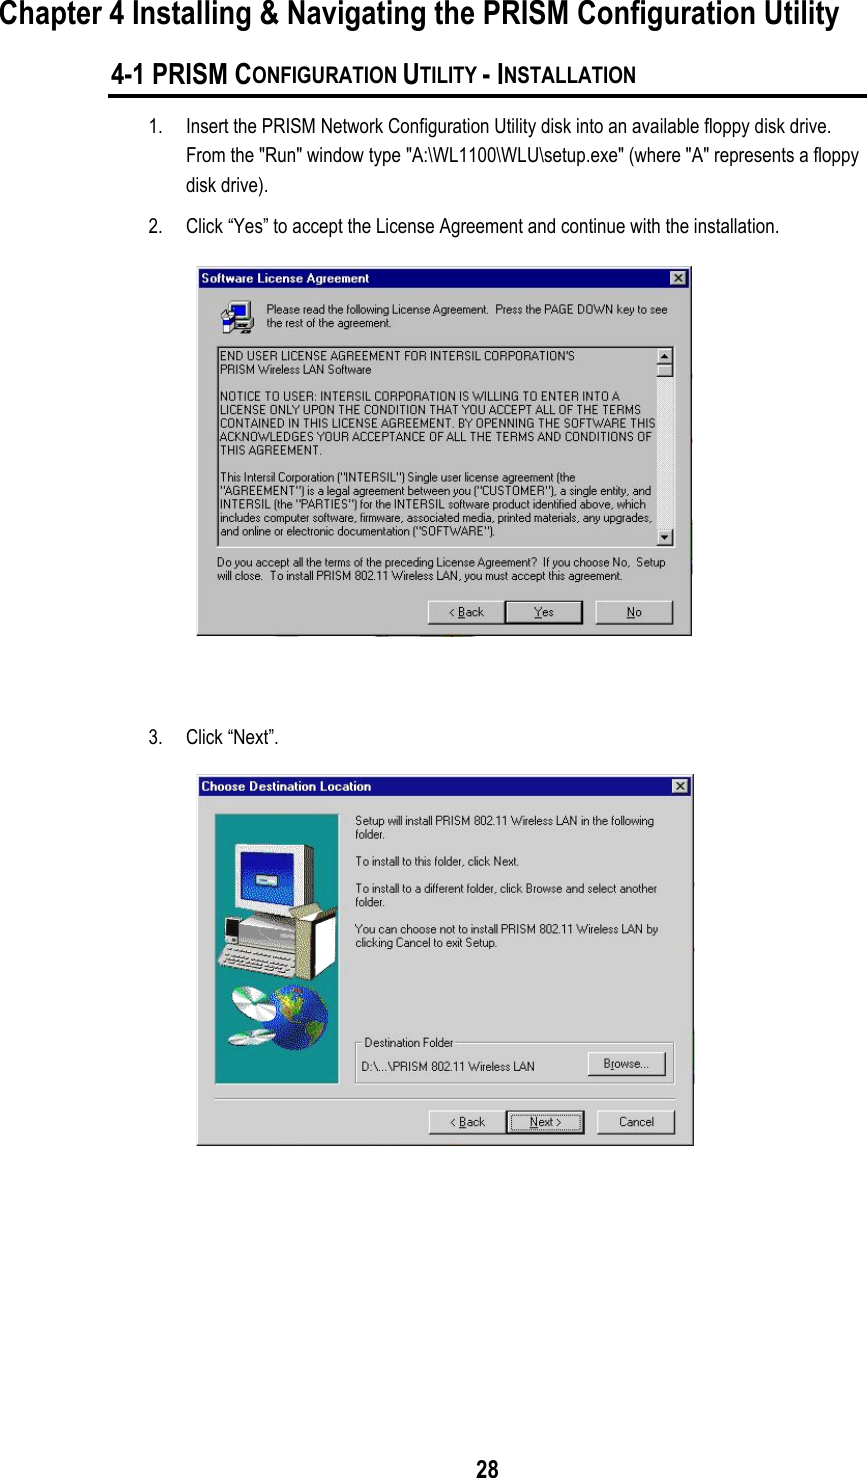 28Chapter 4 Installing &amp; Navigating the PRISM Configuration Utility4-1 PRISM CONFIGURATION UTILITY - INSTALLATION1. Insert the PRISM Network Configuration Utility disk into an available floppy disk drive.From the &quot;Run&quot; window type &quot;A:\WL1100\WLU\setup.exe&quot; (where &quot;A&quot; represents a floppydisk drive).2. Click “Yes” to accept the License Agreement and continue with the installation.3. Click “Next”.